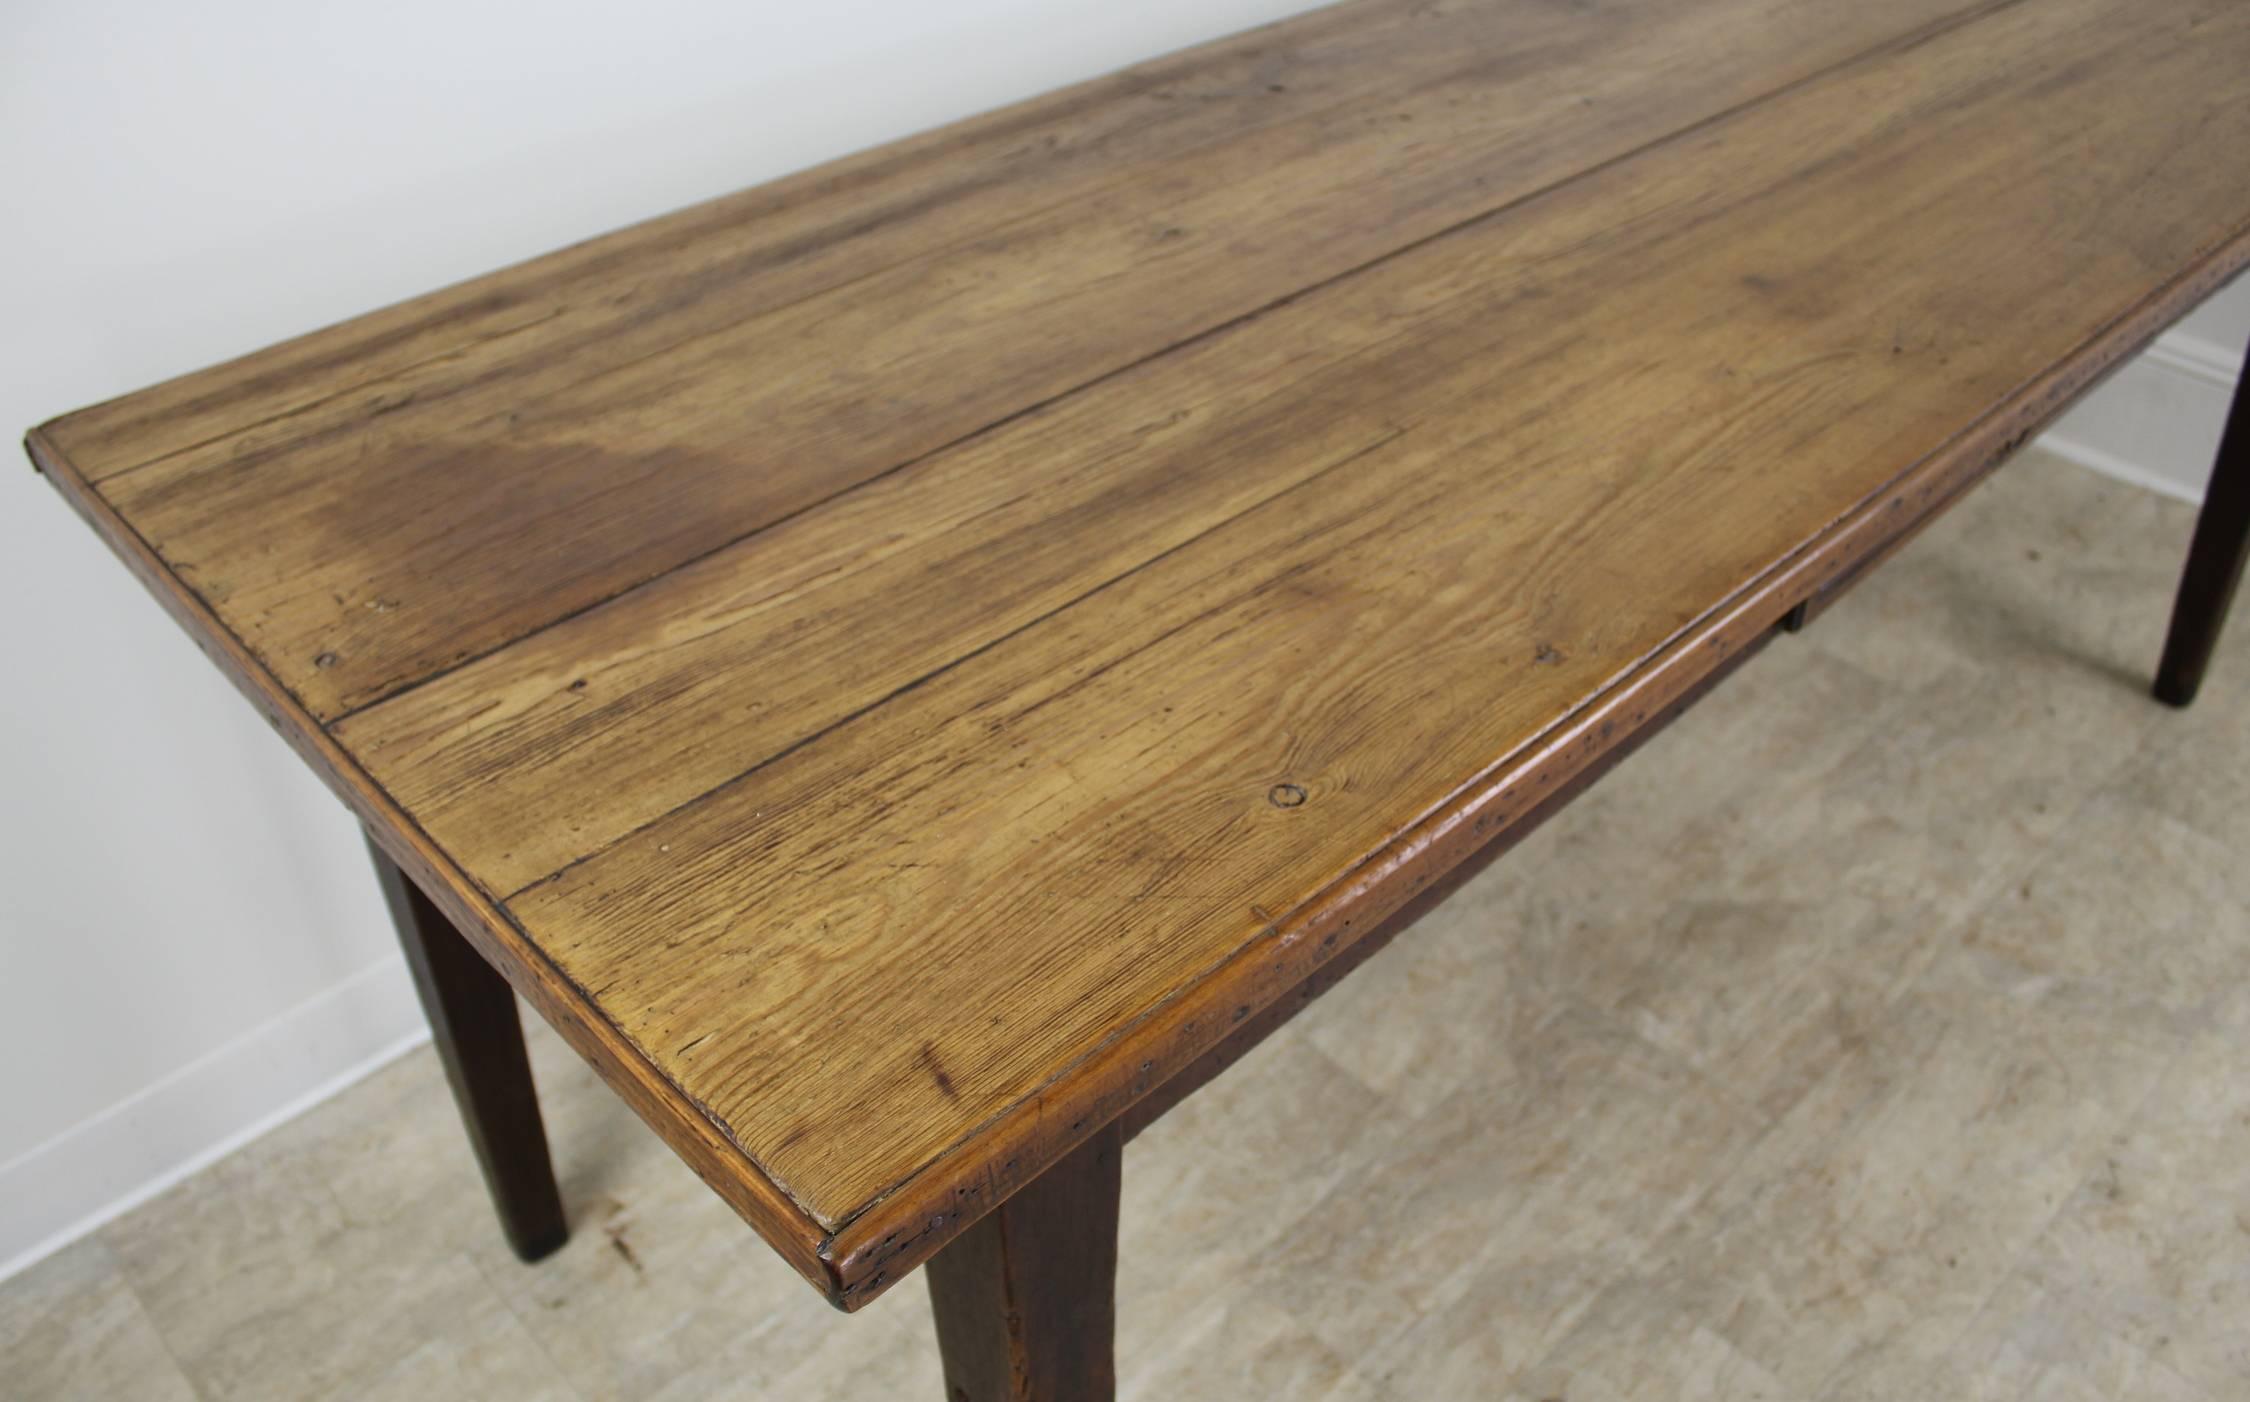 19th Century Antique Pine Farm Table with Single Drawer and Decorative Edge